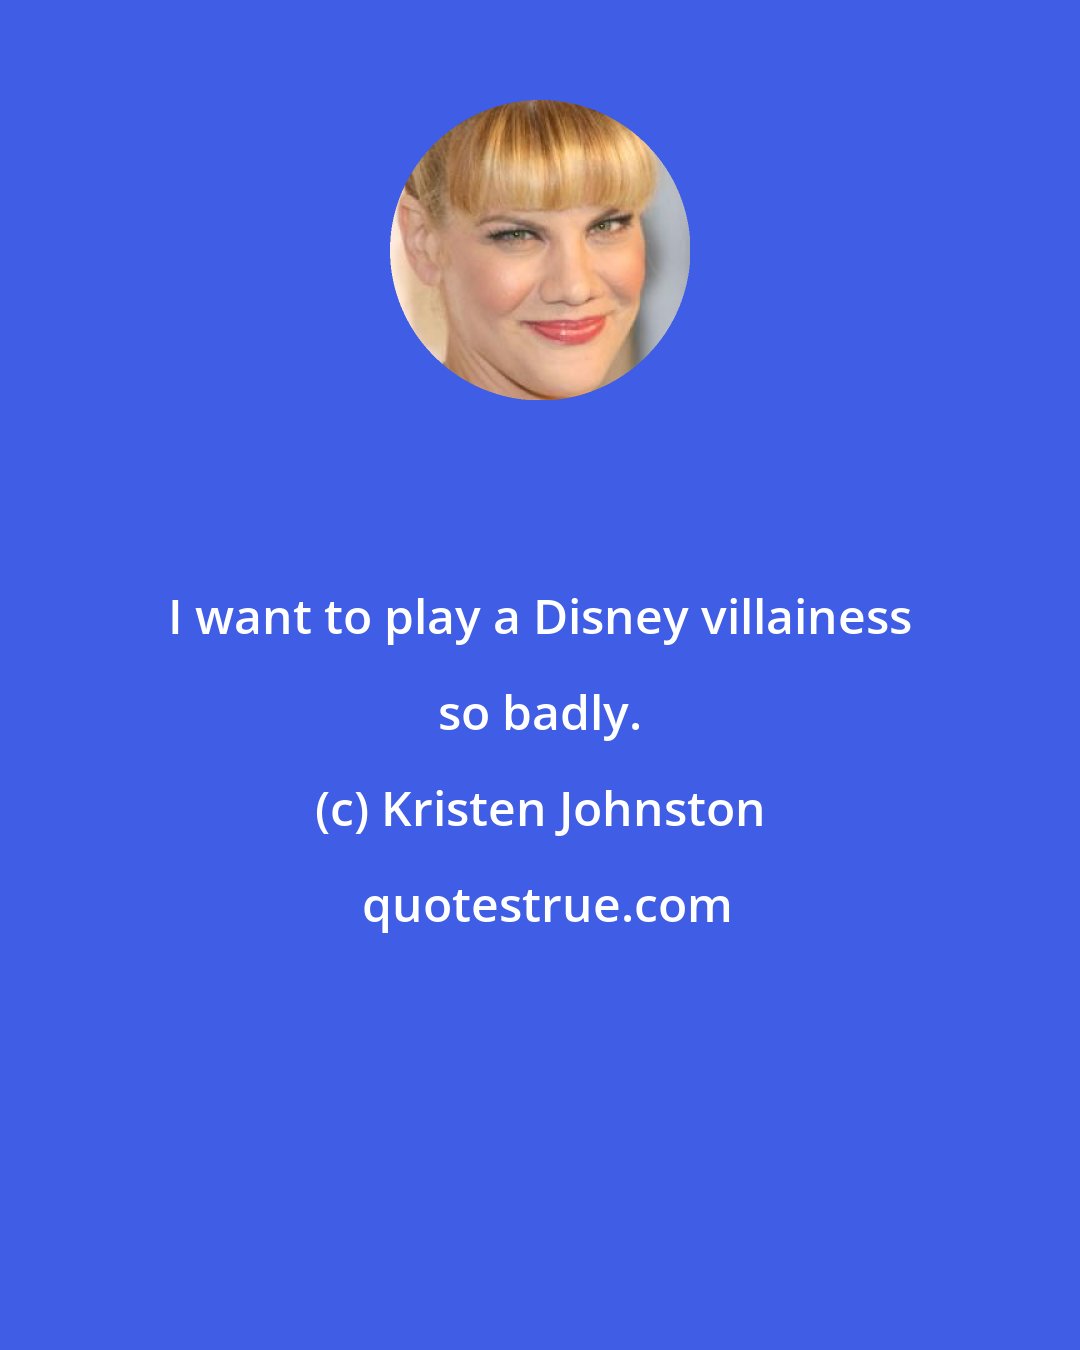 Kristen Johnston: I want to play a Disney villainess so badly.